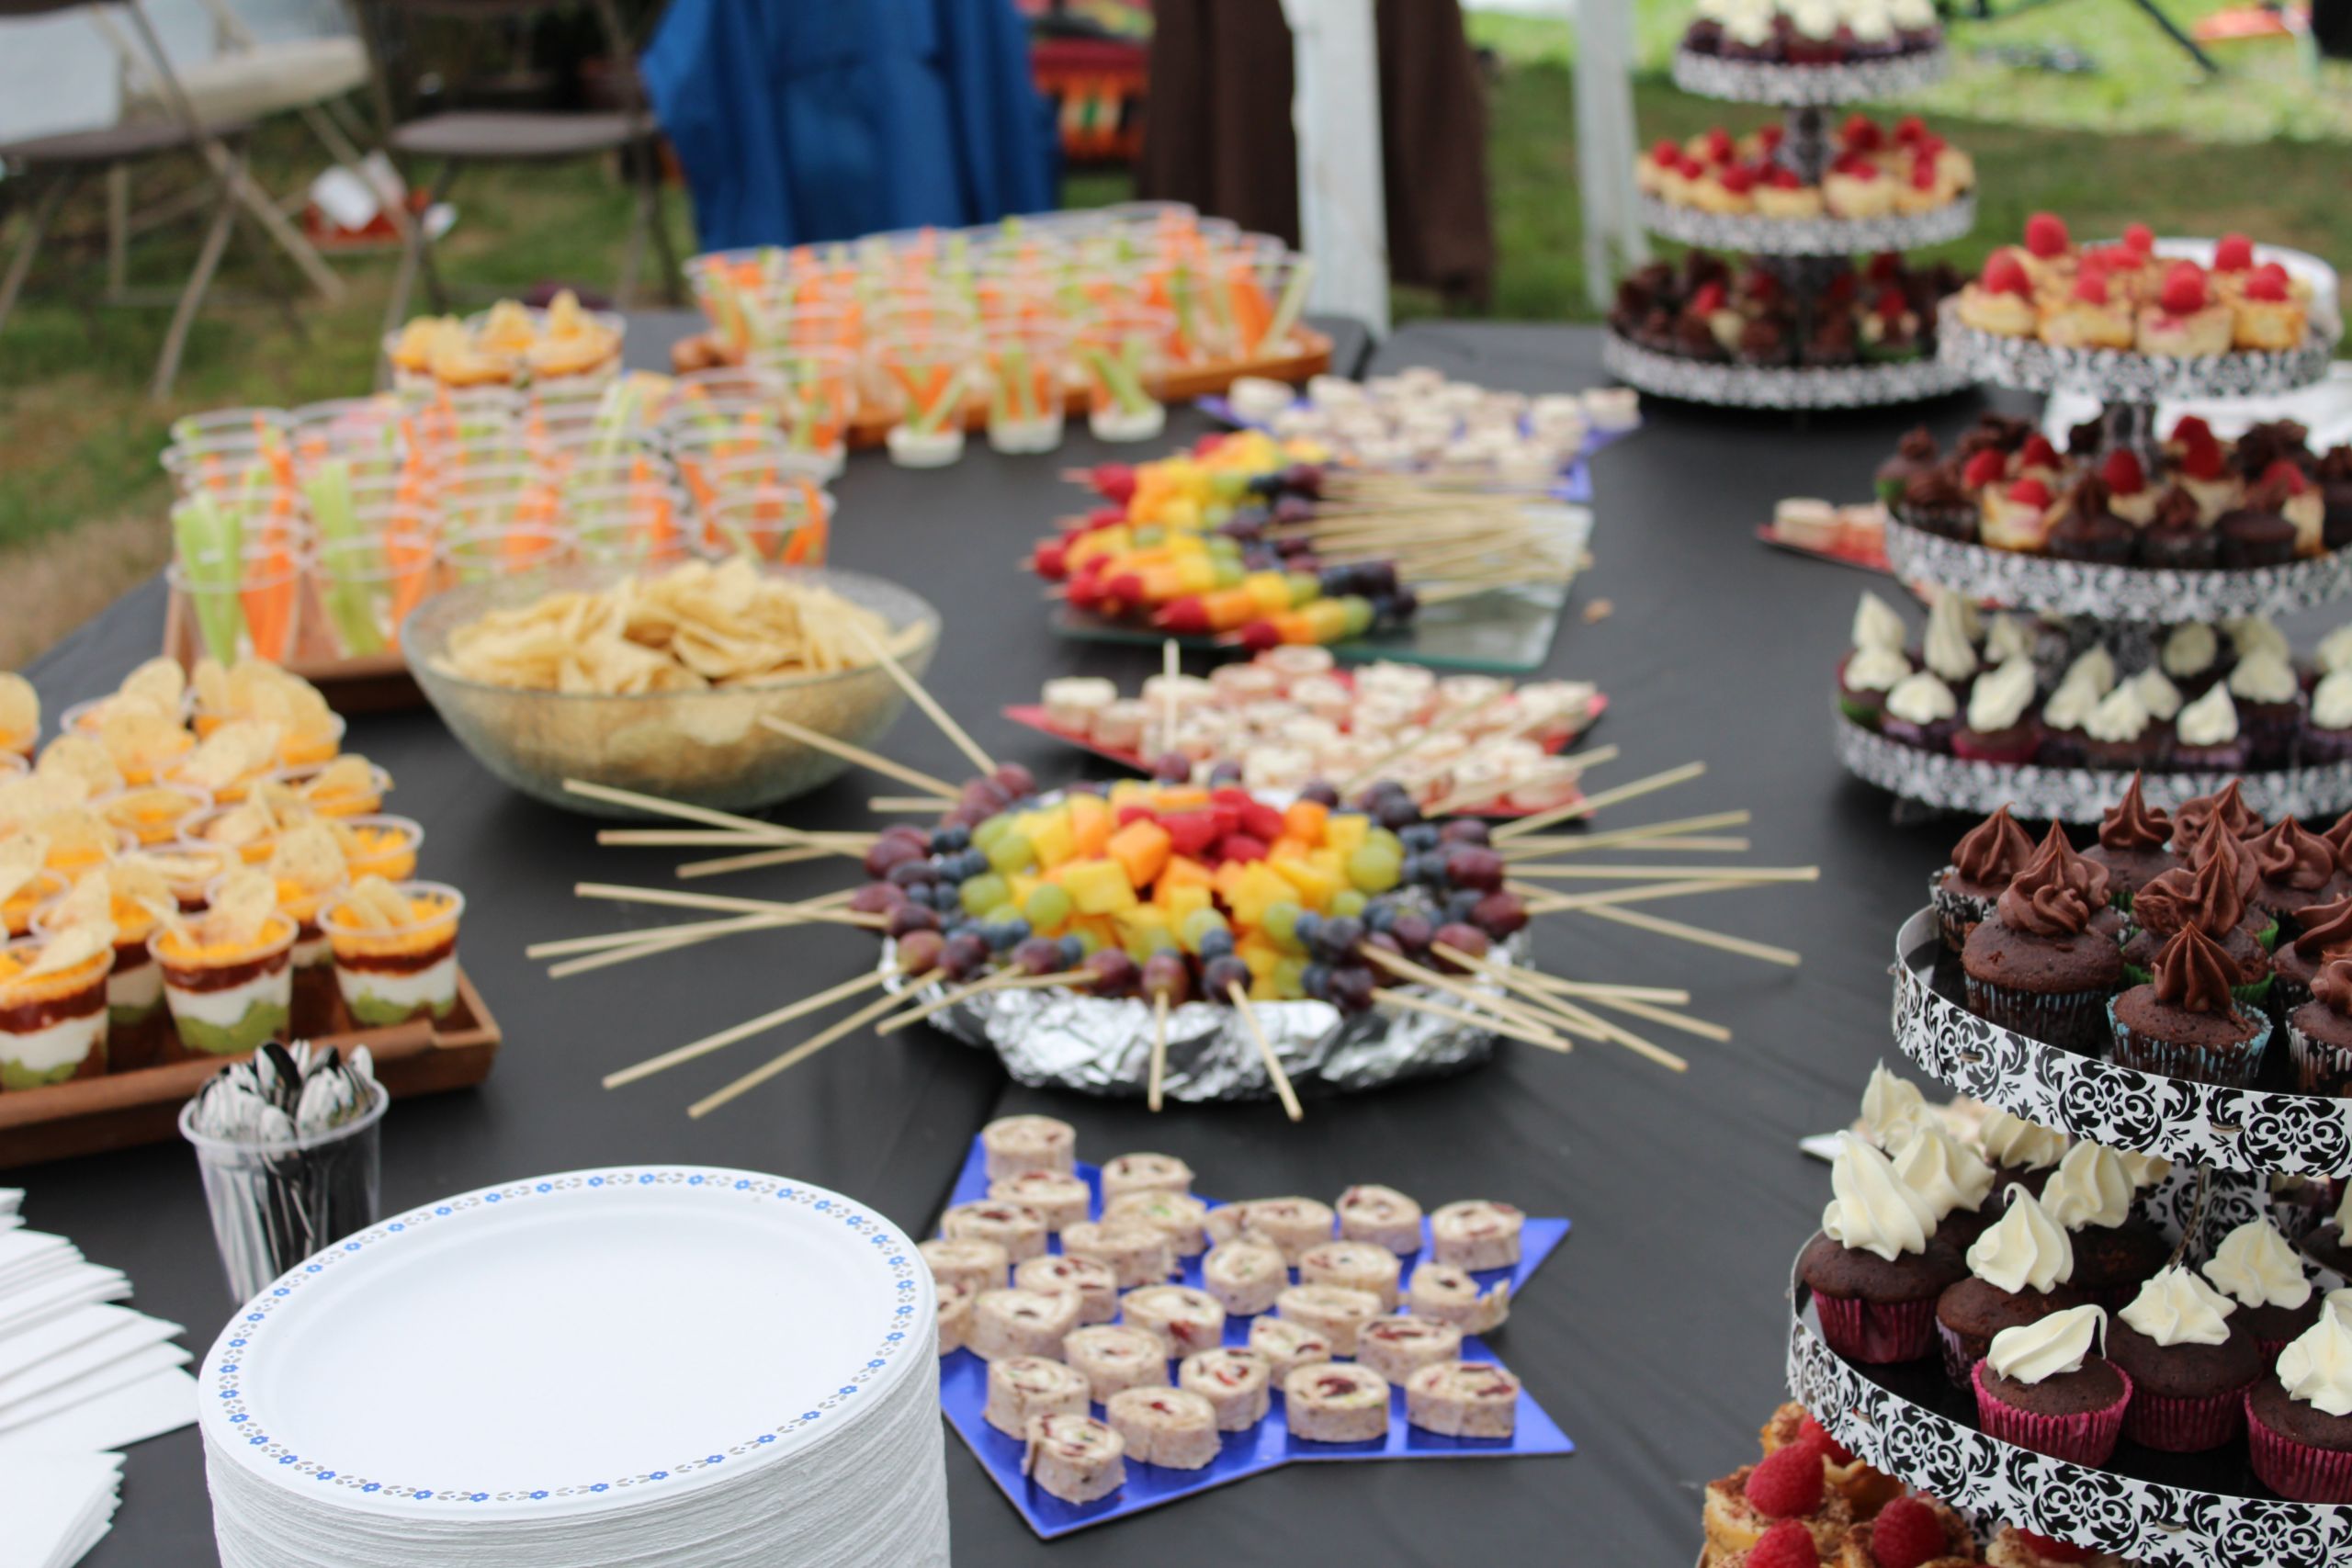 Food Ideas For A Graduation Party
 Party Food